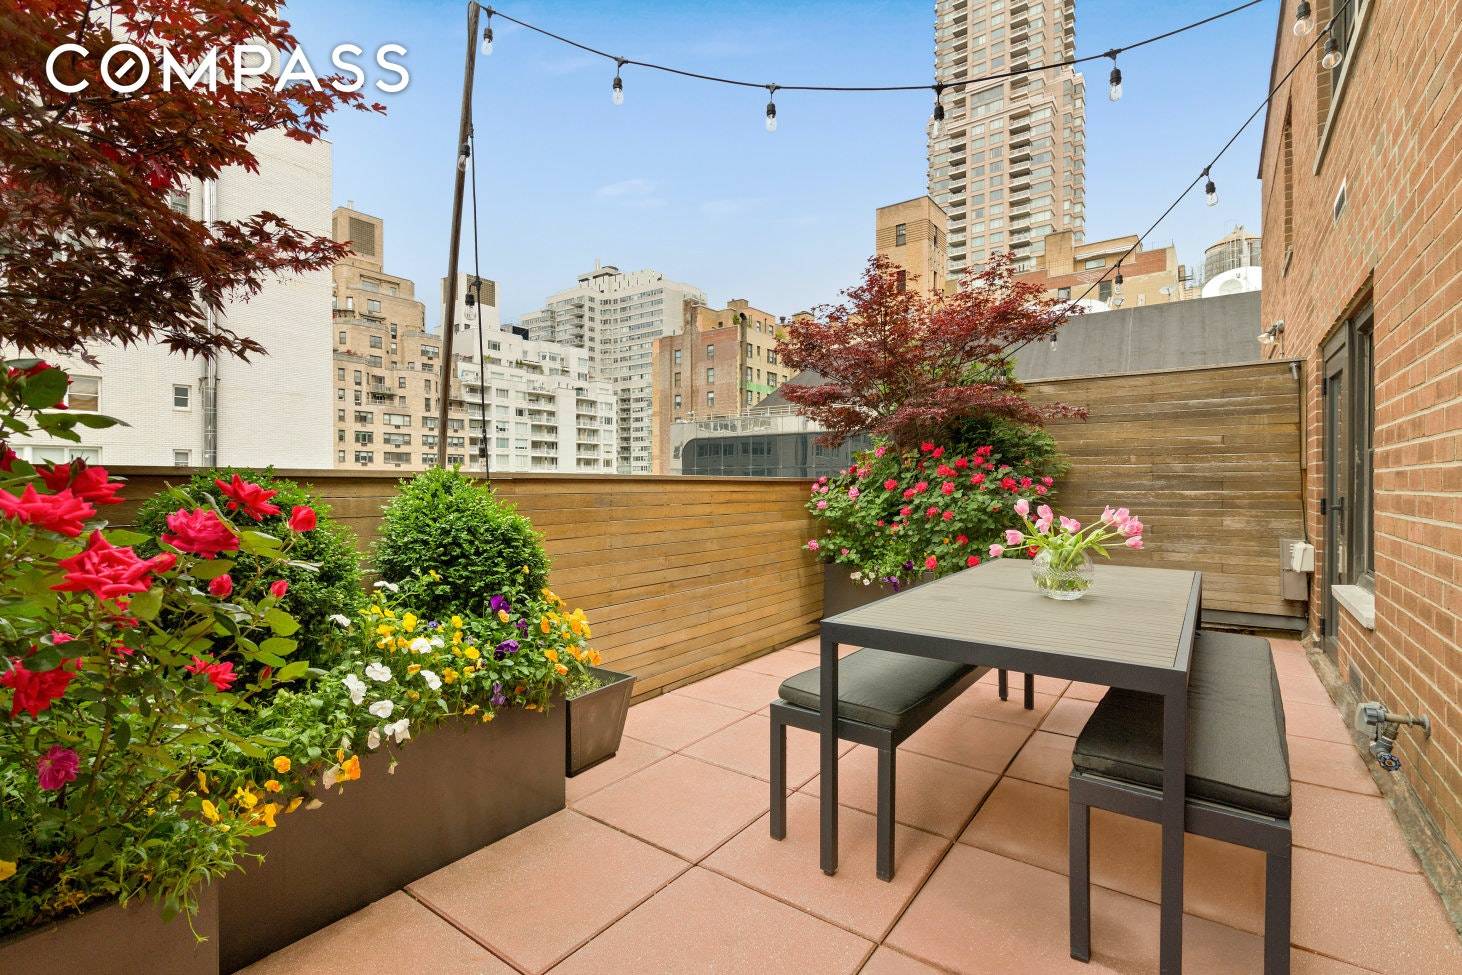 Appointed on the Upper East Side, this immaculate sun flooded two bedroom home features tasteful design, spacious closets, and a 400 square foot, fully landscaped terrace.